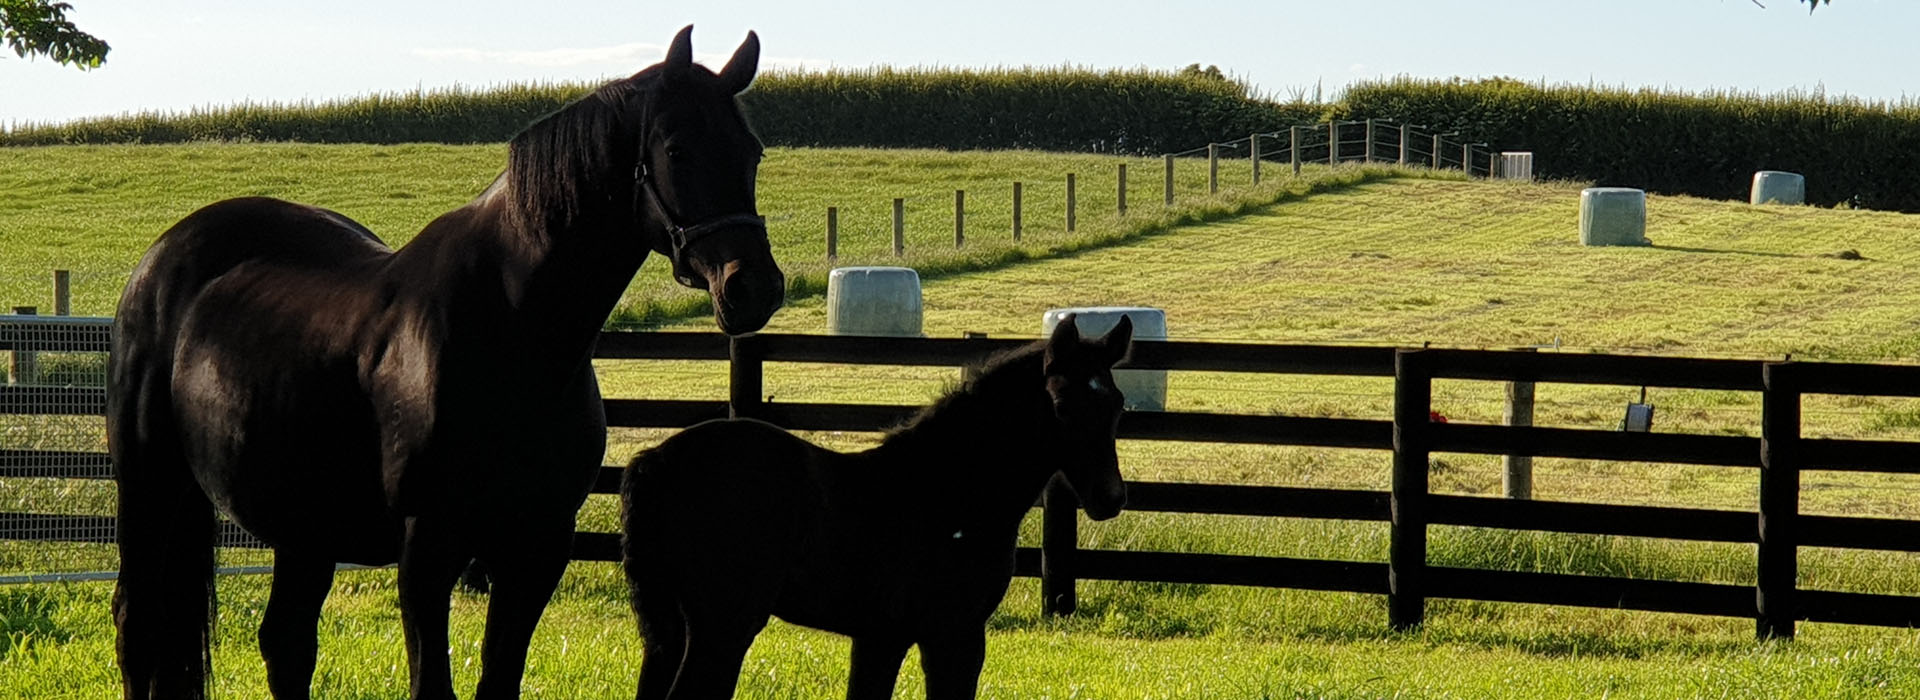 Mare and Foal - EquiBreed NZ